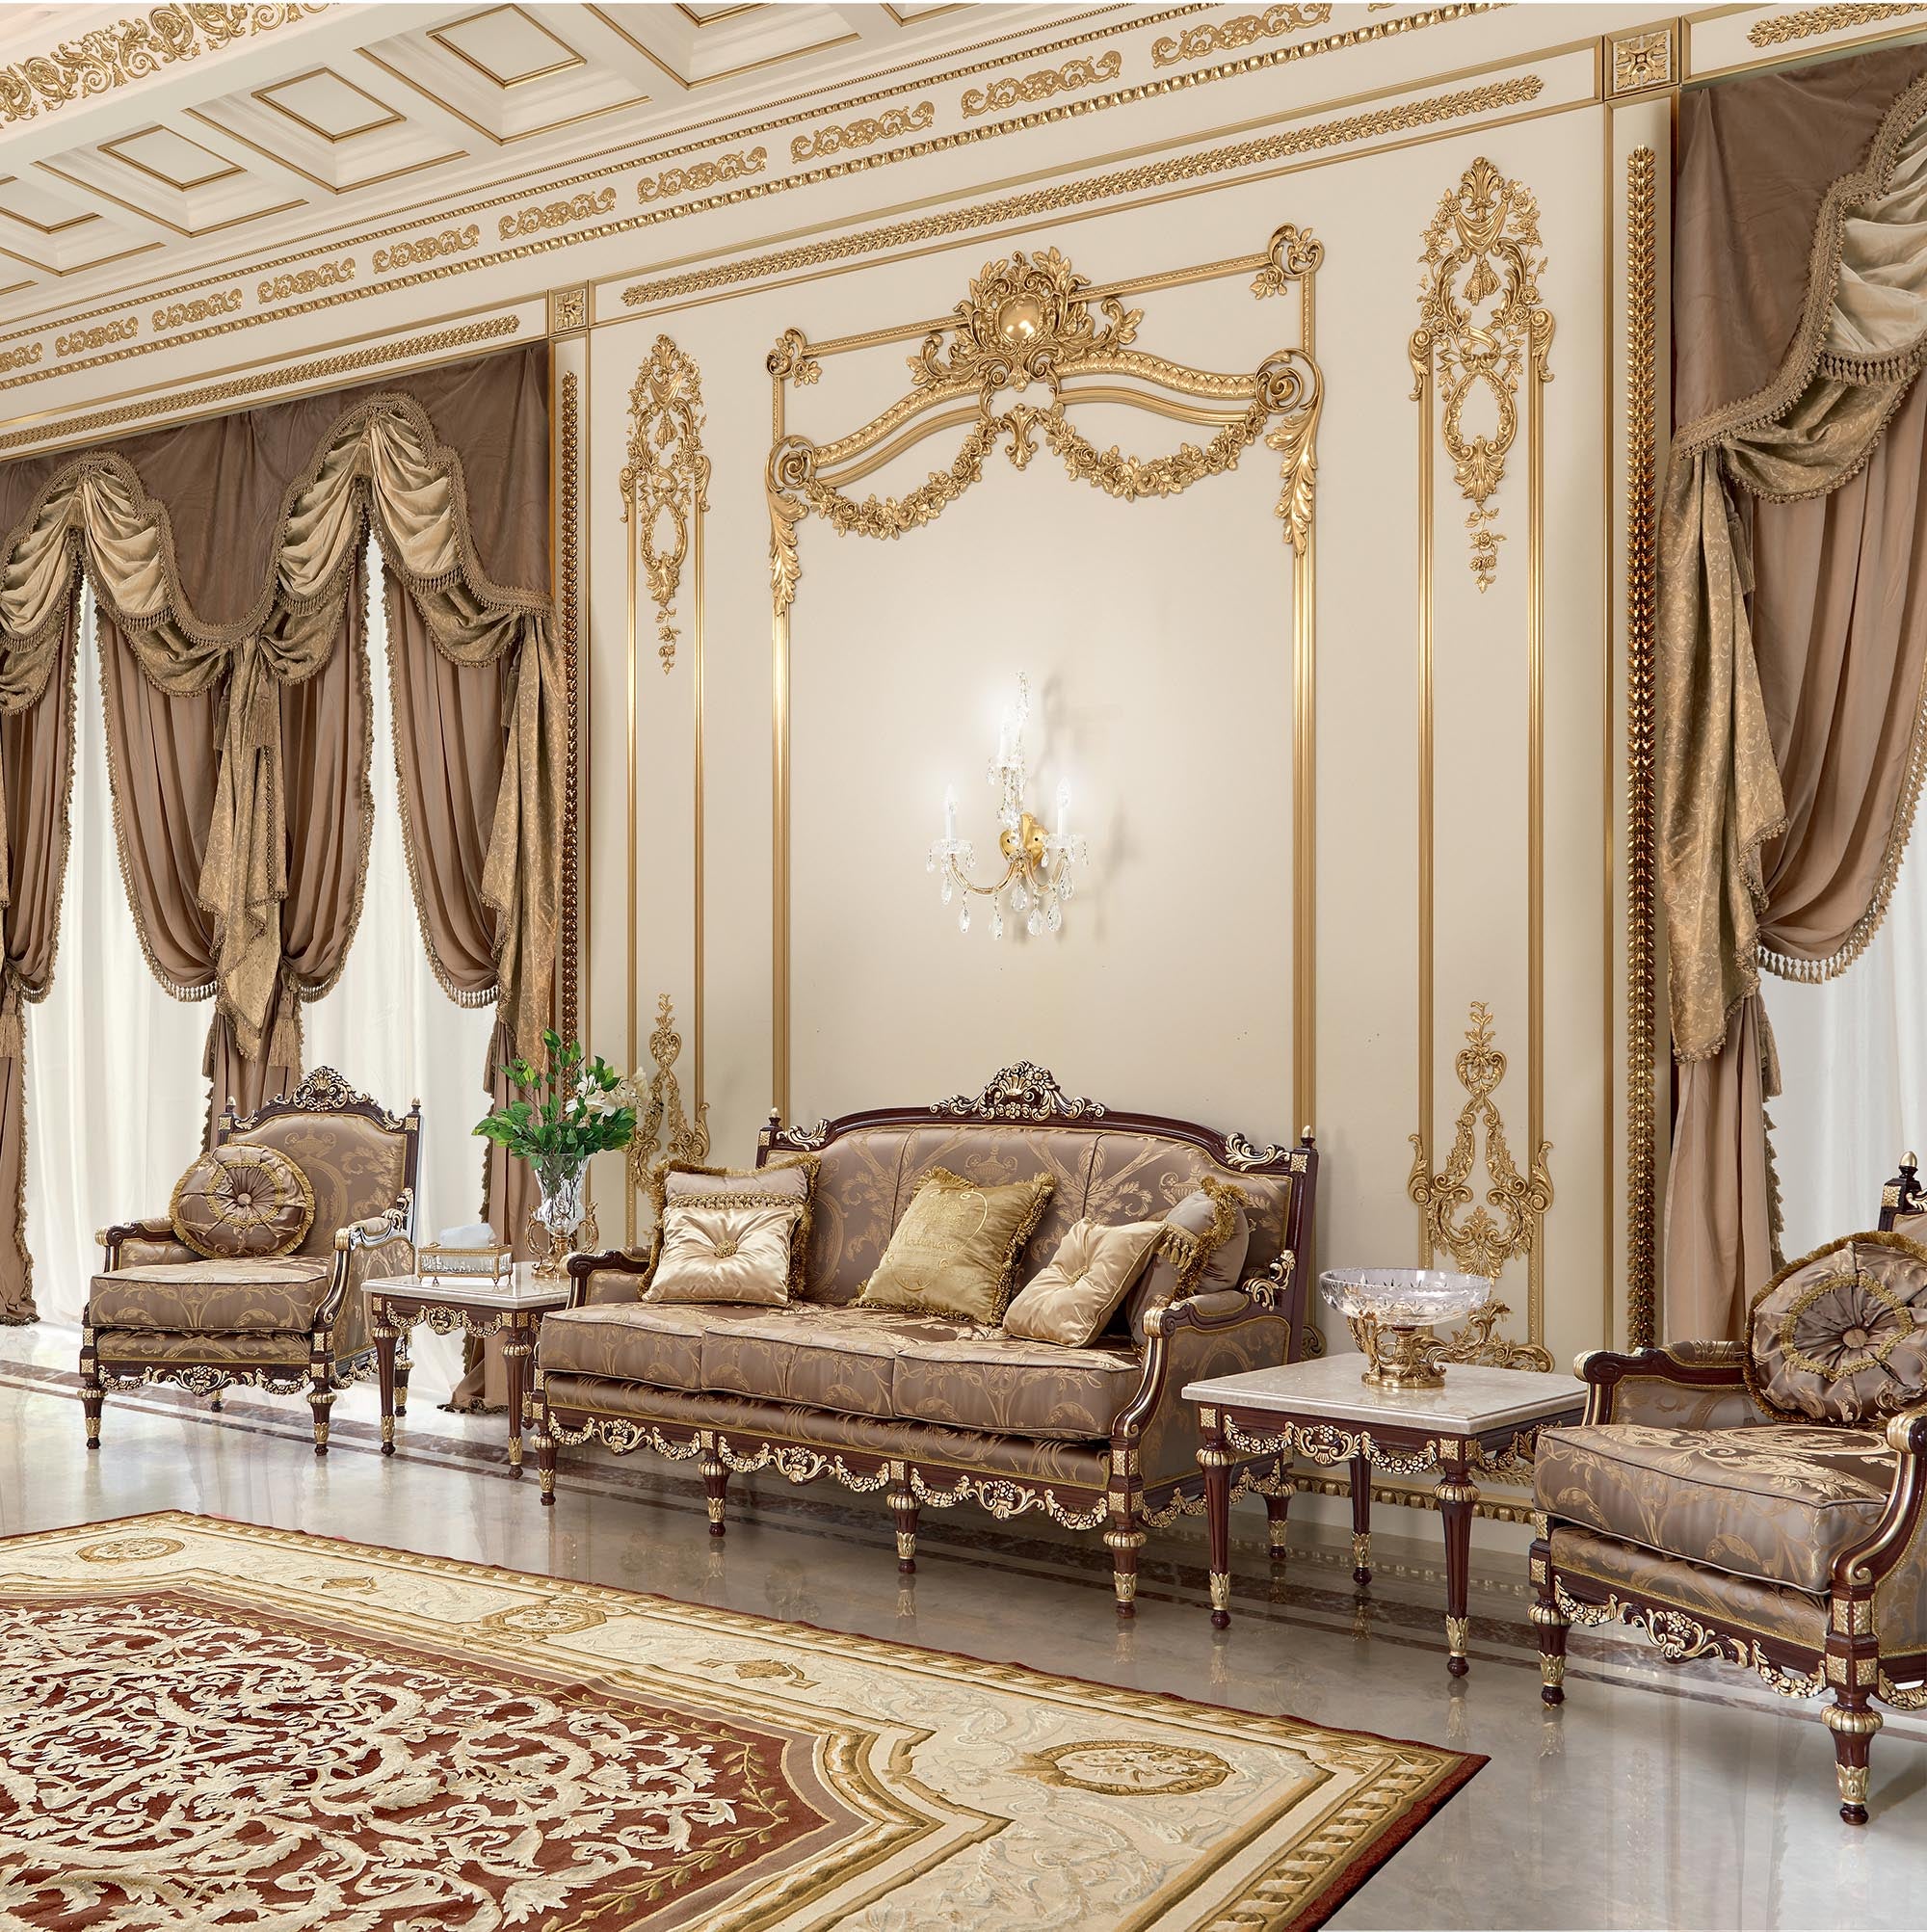 Imperial Homes: Living Like Royalty with Opulent Design